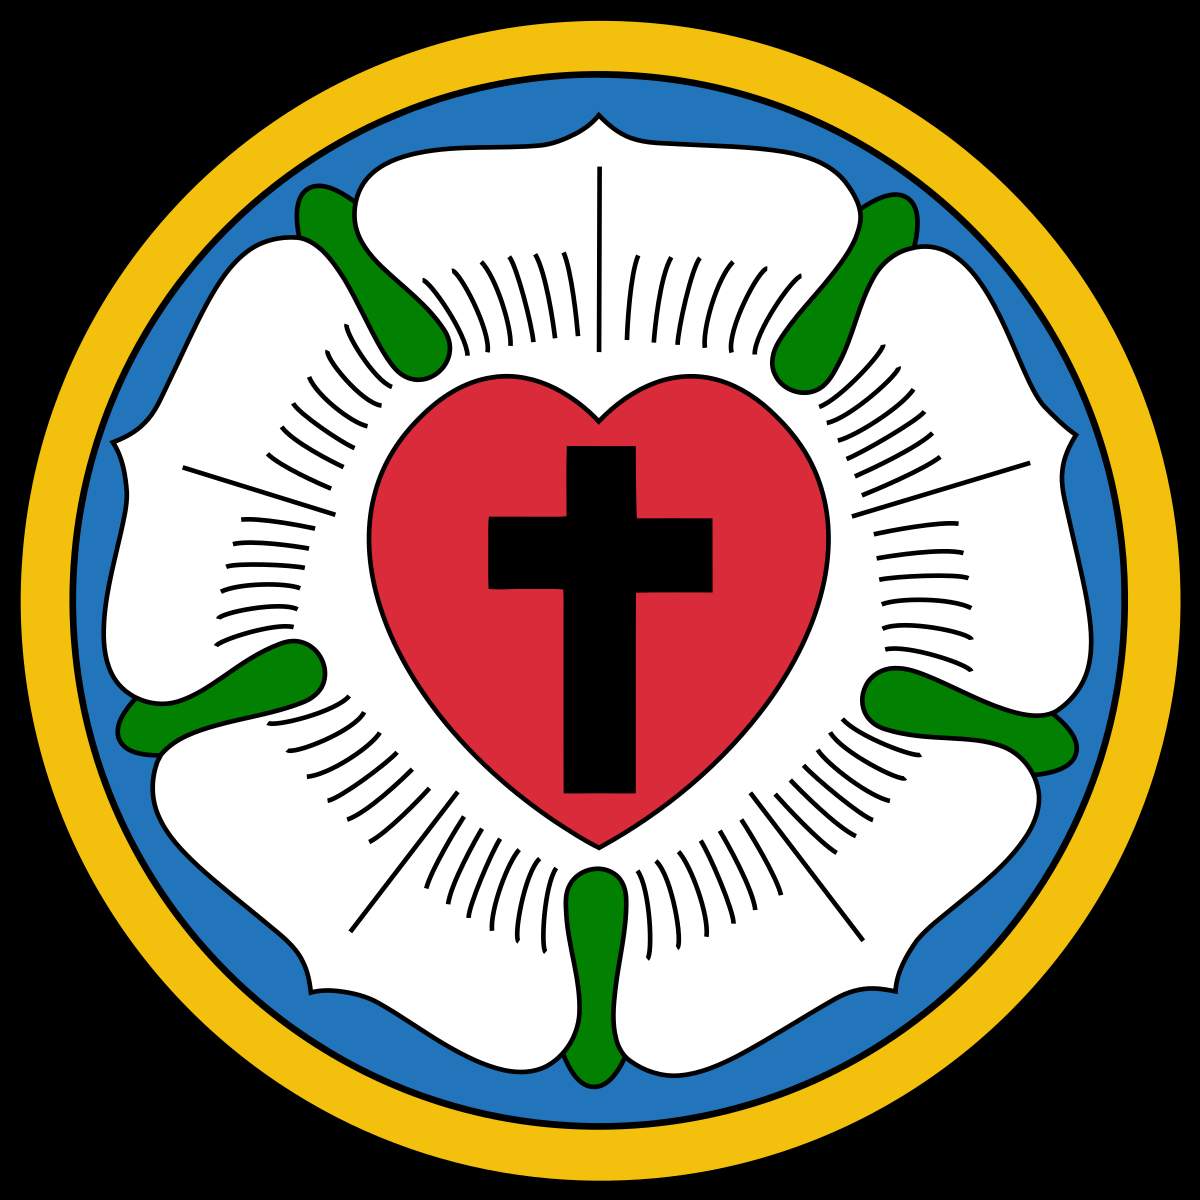 1520: Luther Rose Seal